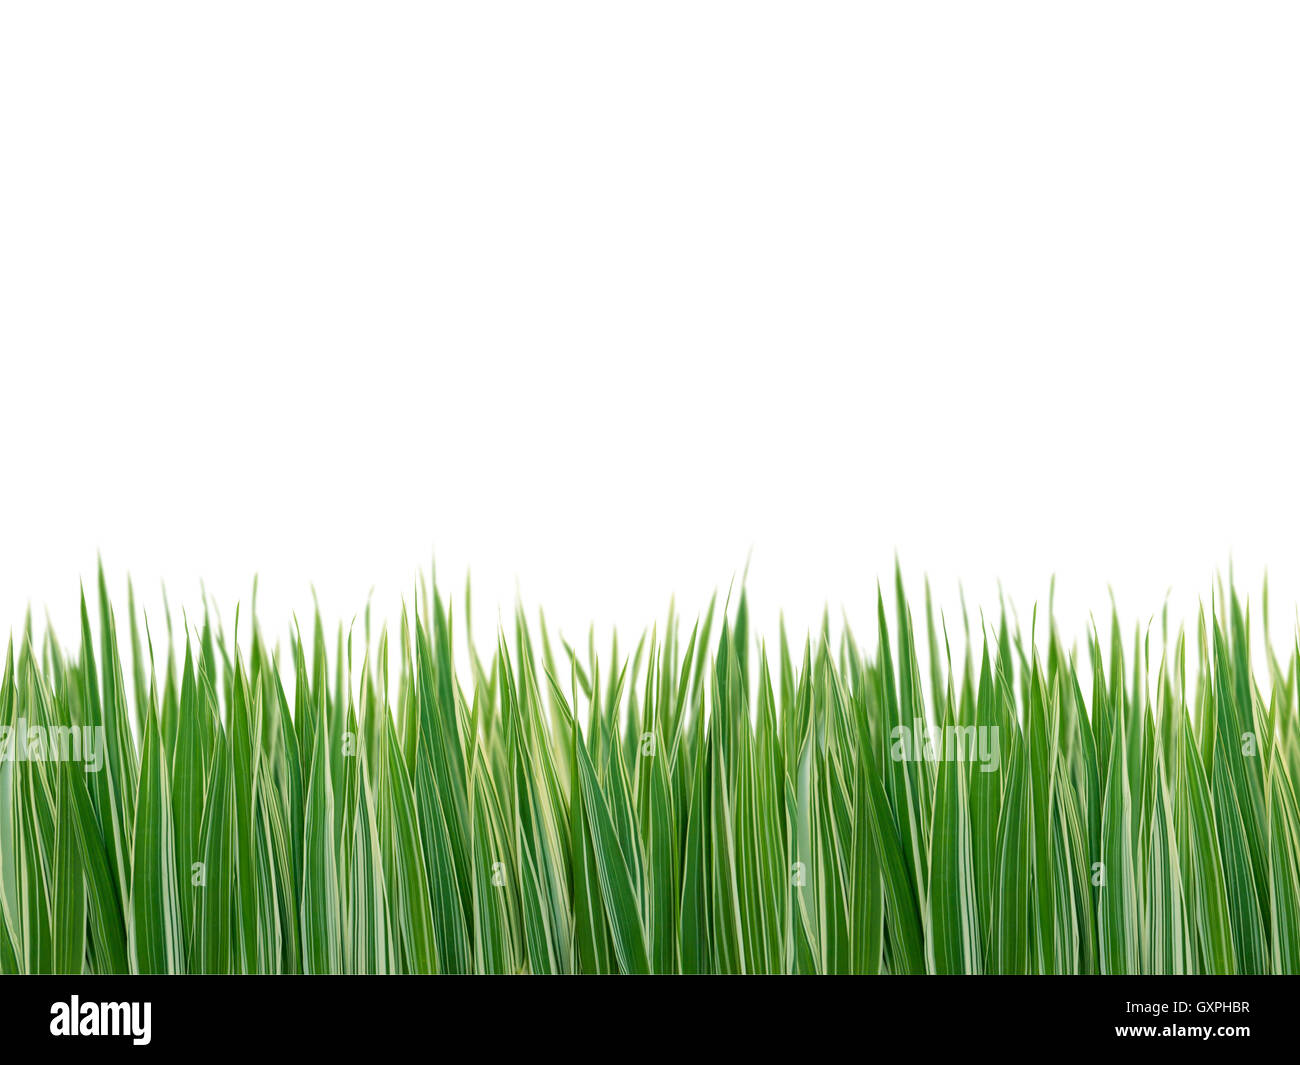 Vert et blanc à rayures grass isolated on white Banque D'Images